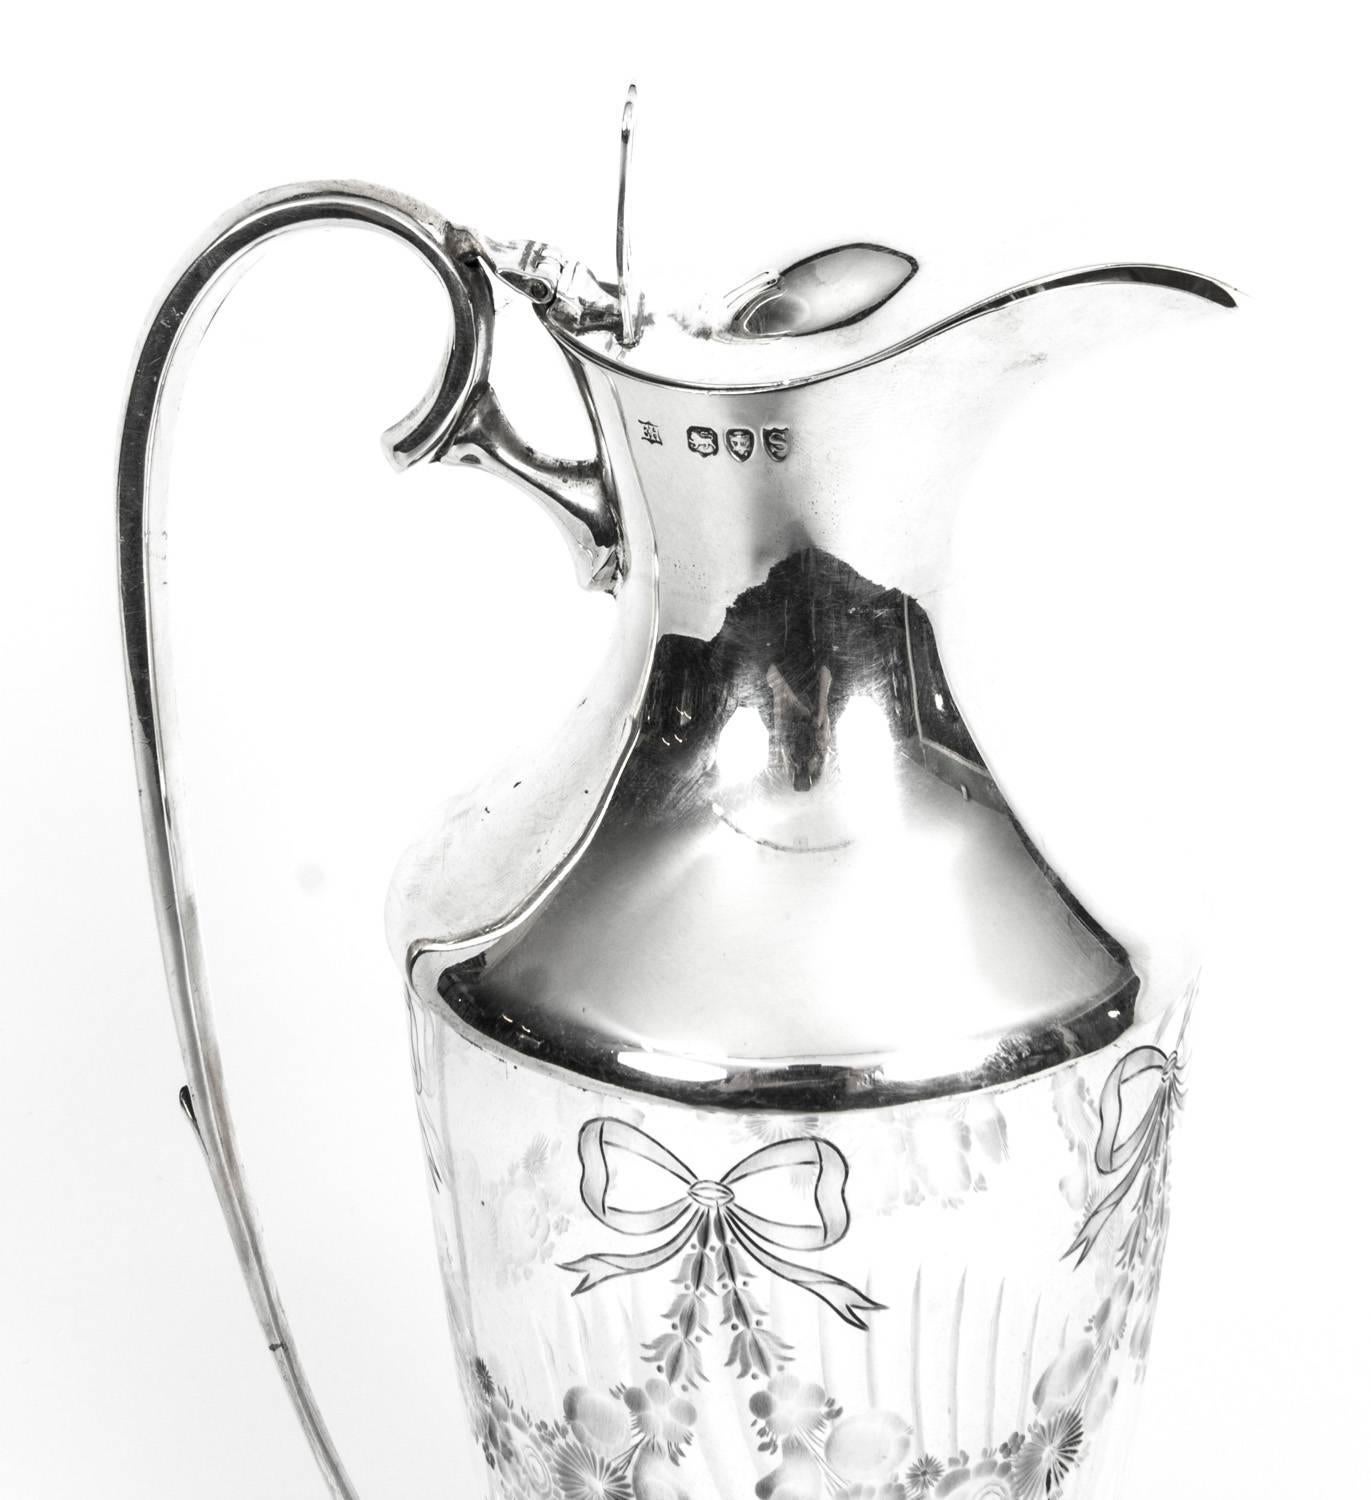 A magnificent antique Victorian Sterling Silver and cut crystal claret jug, with hallmarks for London 1893 and the makers mark of the renowned silversmith William Hutton.

The piece is of baluster form, has a circular foot and the glass is